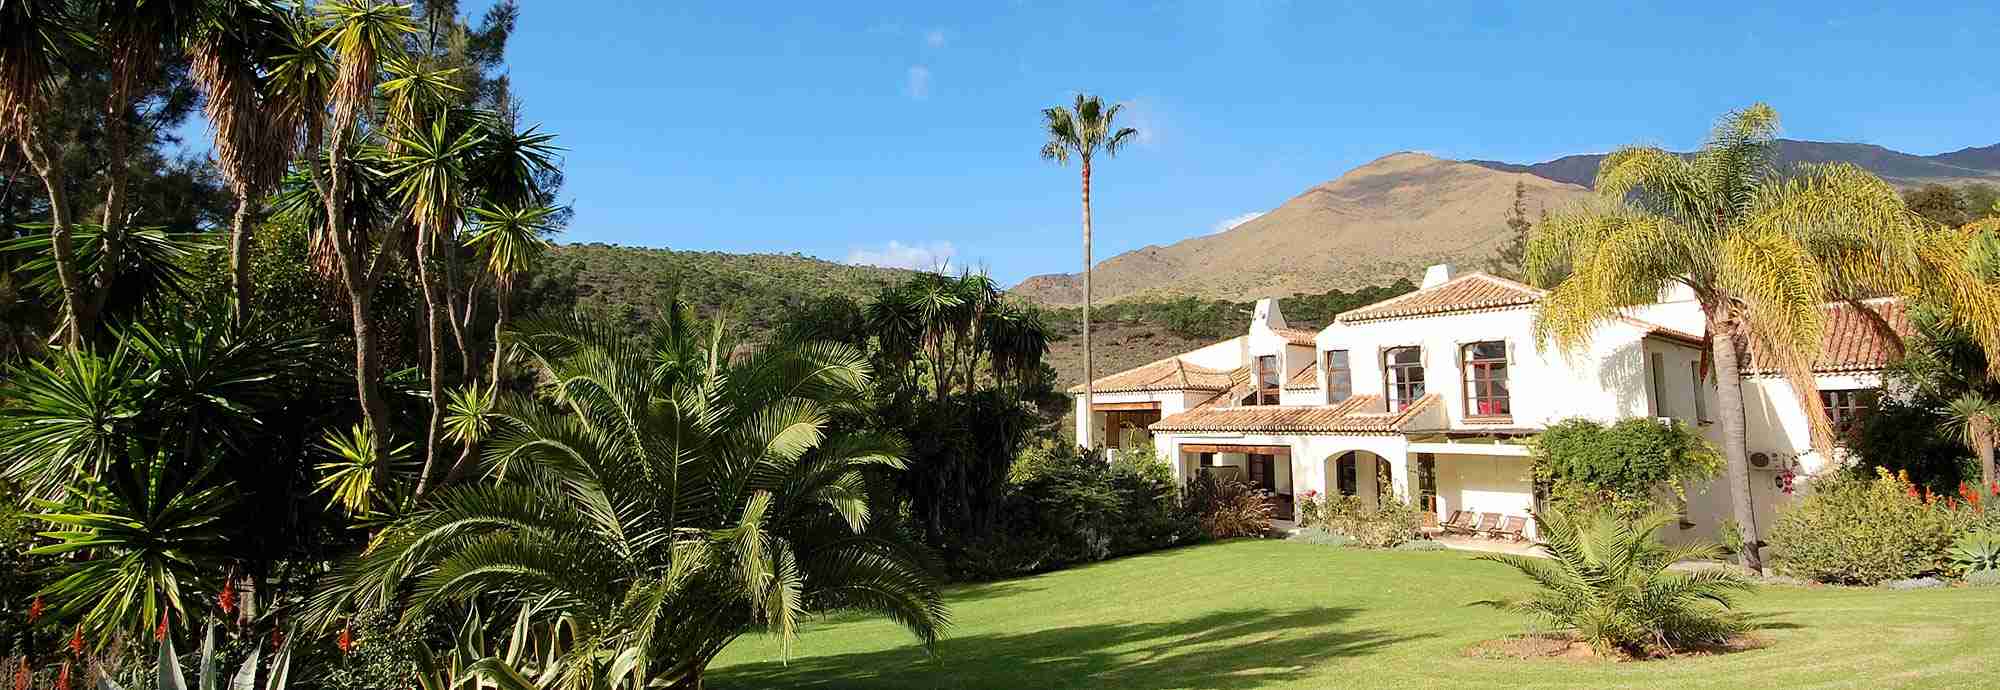 Large Holiday  Villas in Andalucia near the beach